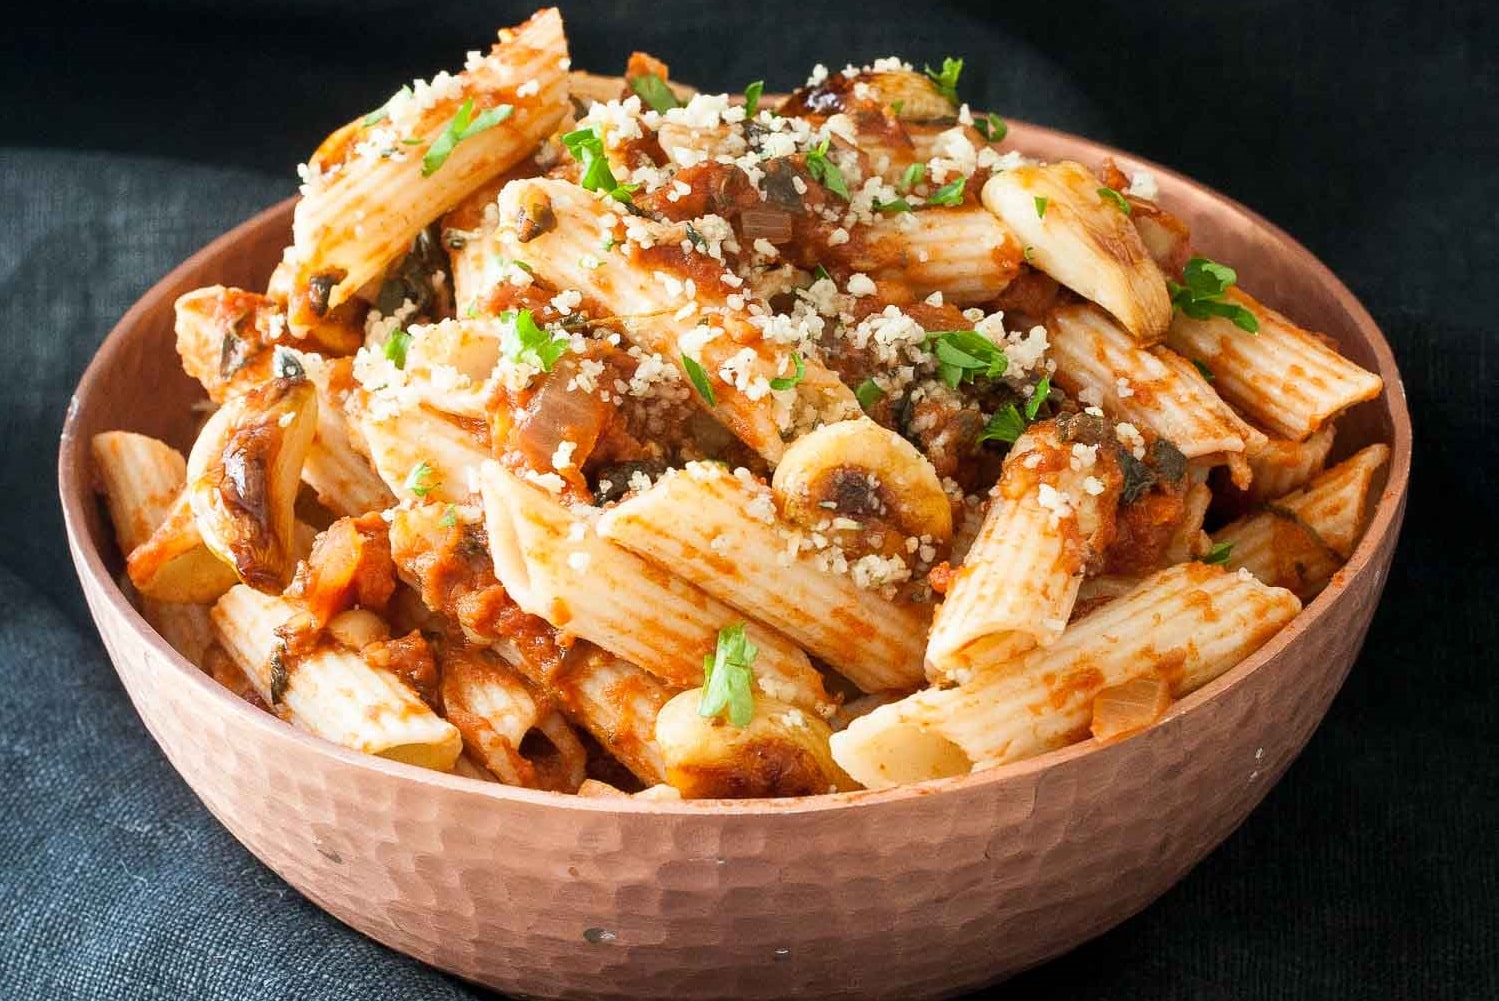 Chickpeas in Spicy Smoked Tomato Sauce with Penne